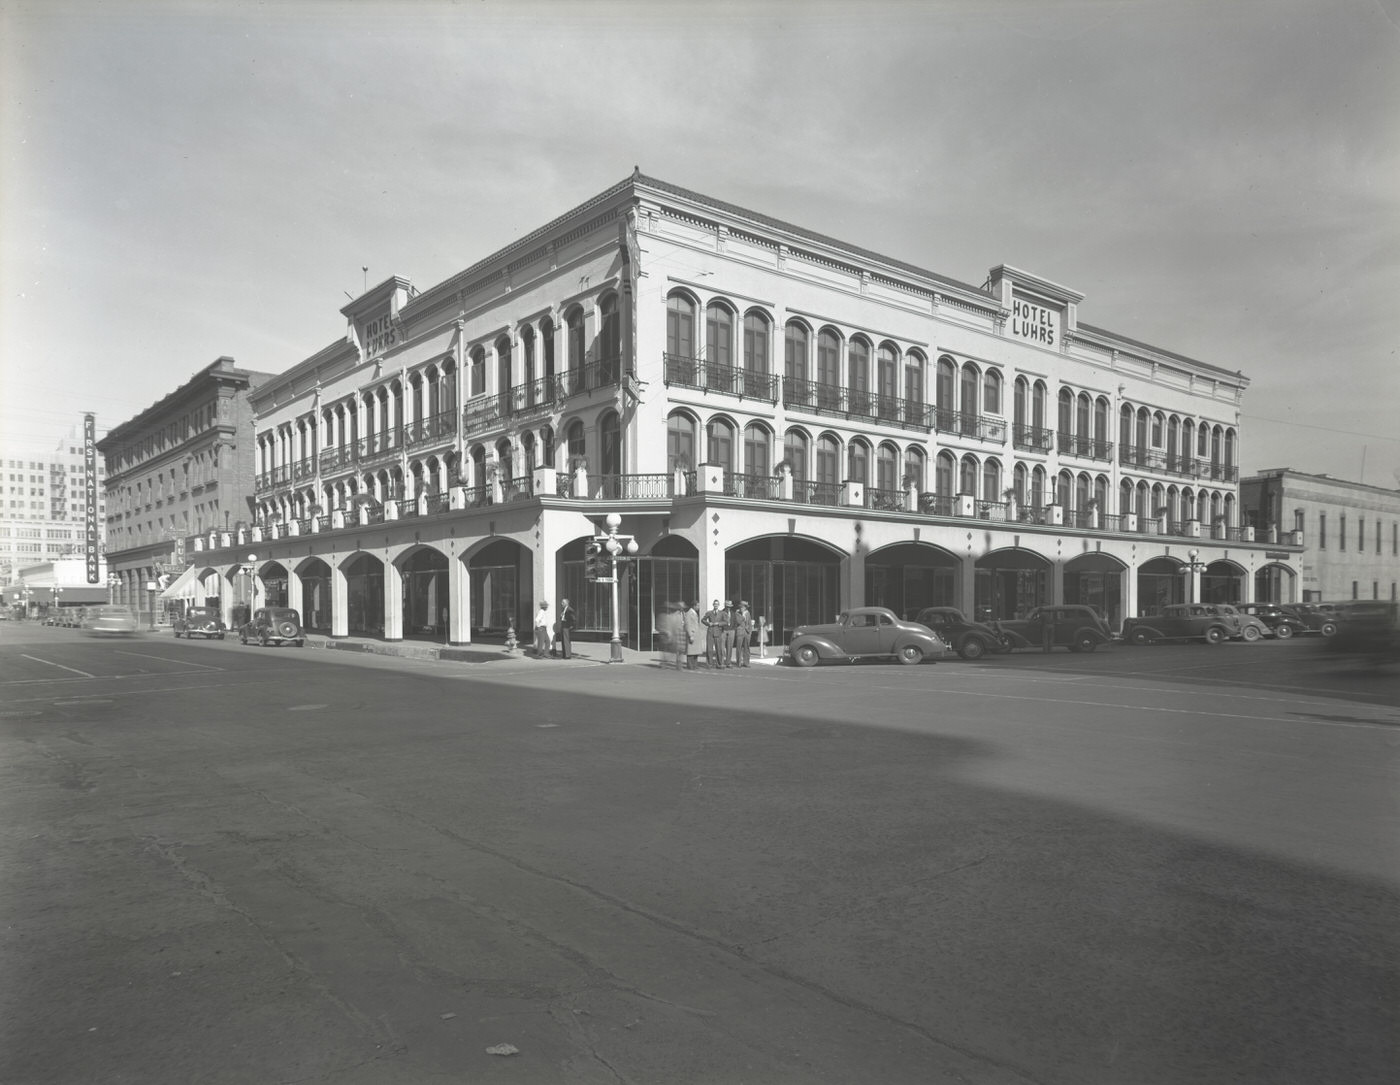 Luhrs Hotel Exterior, 1930s